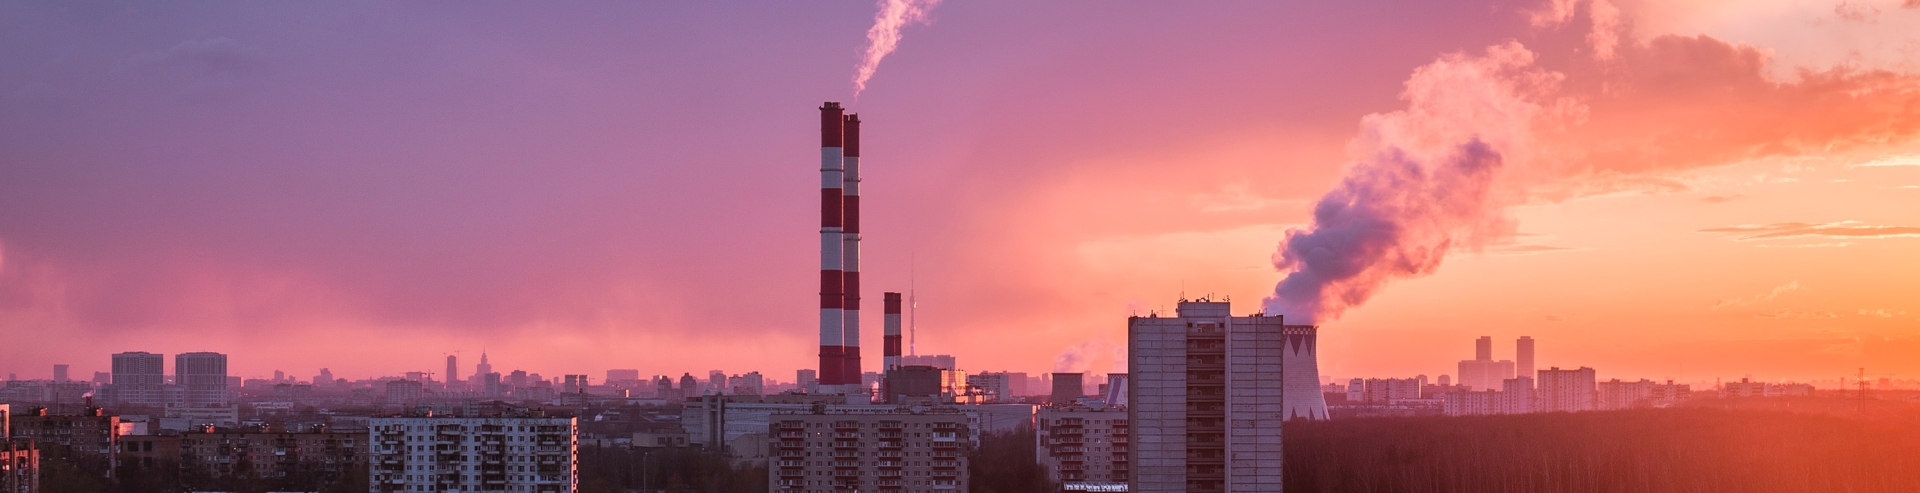 Image of industrial site at sunset